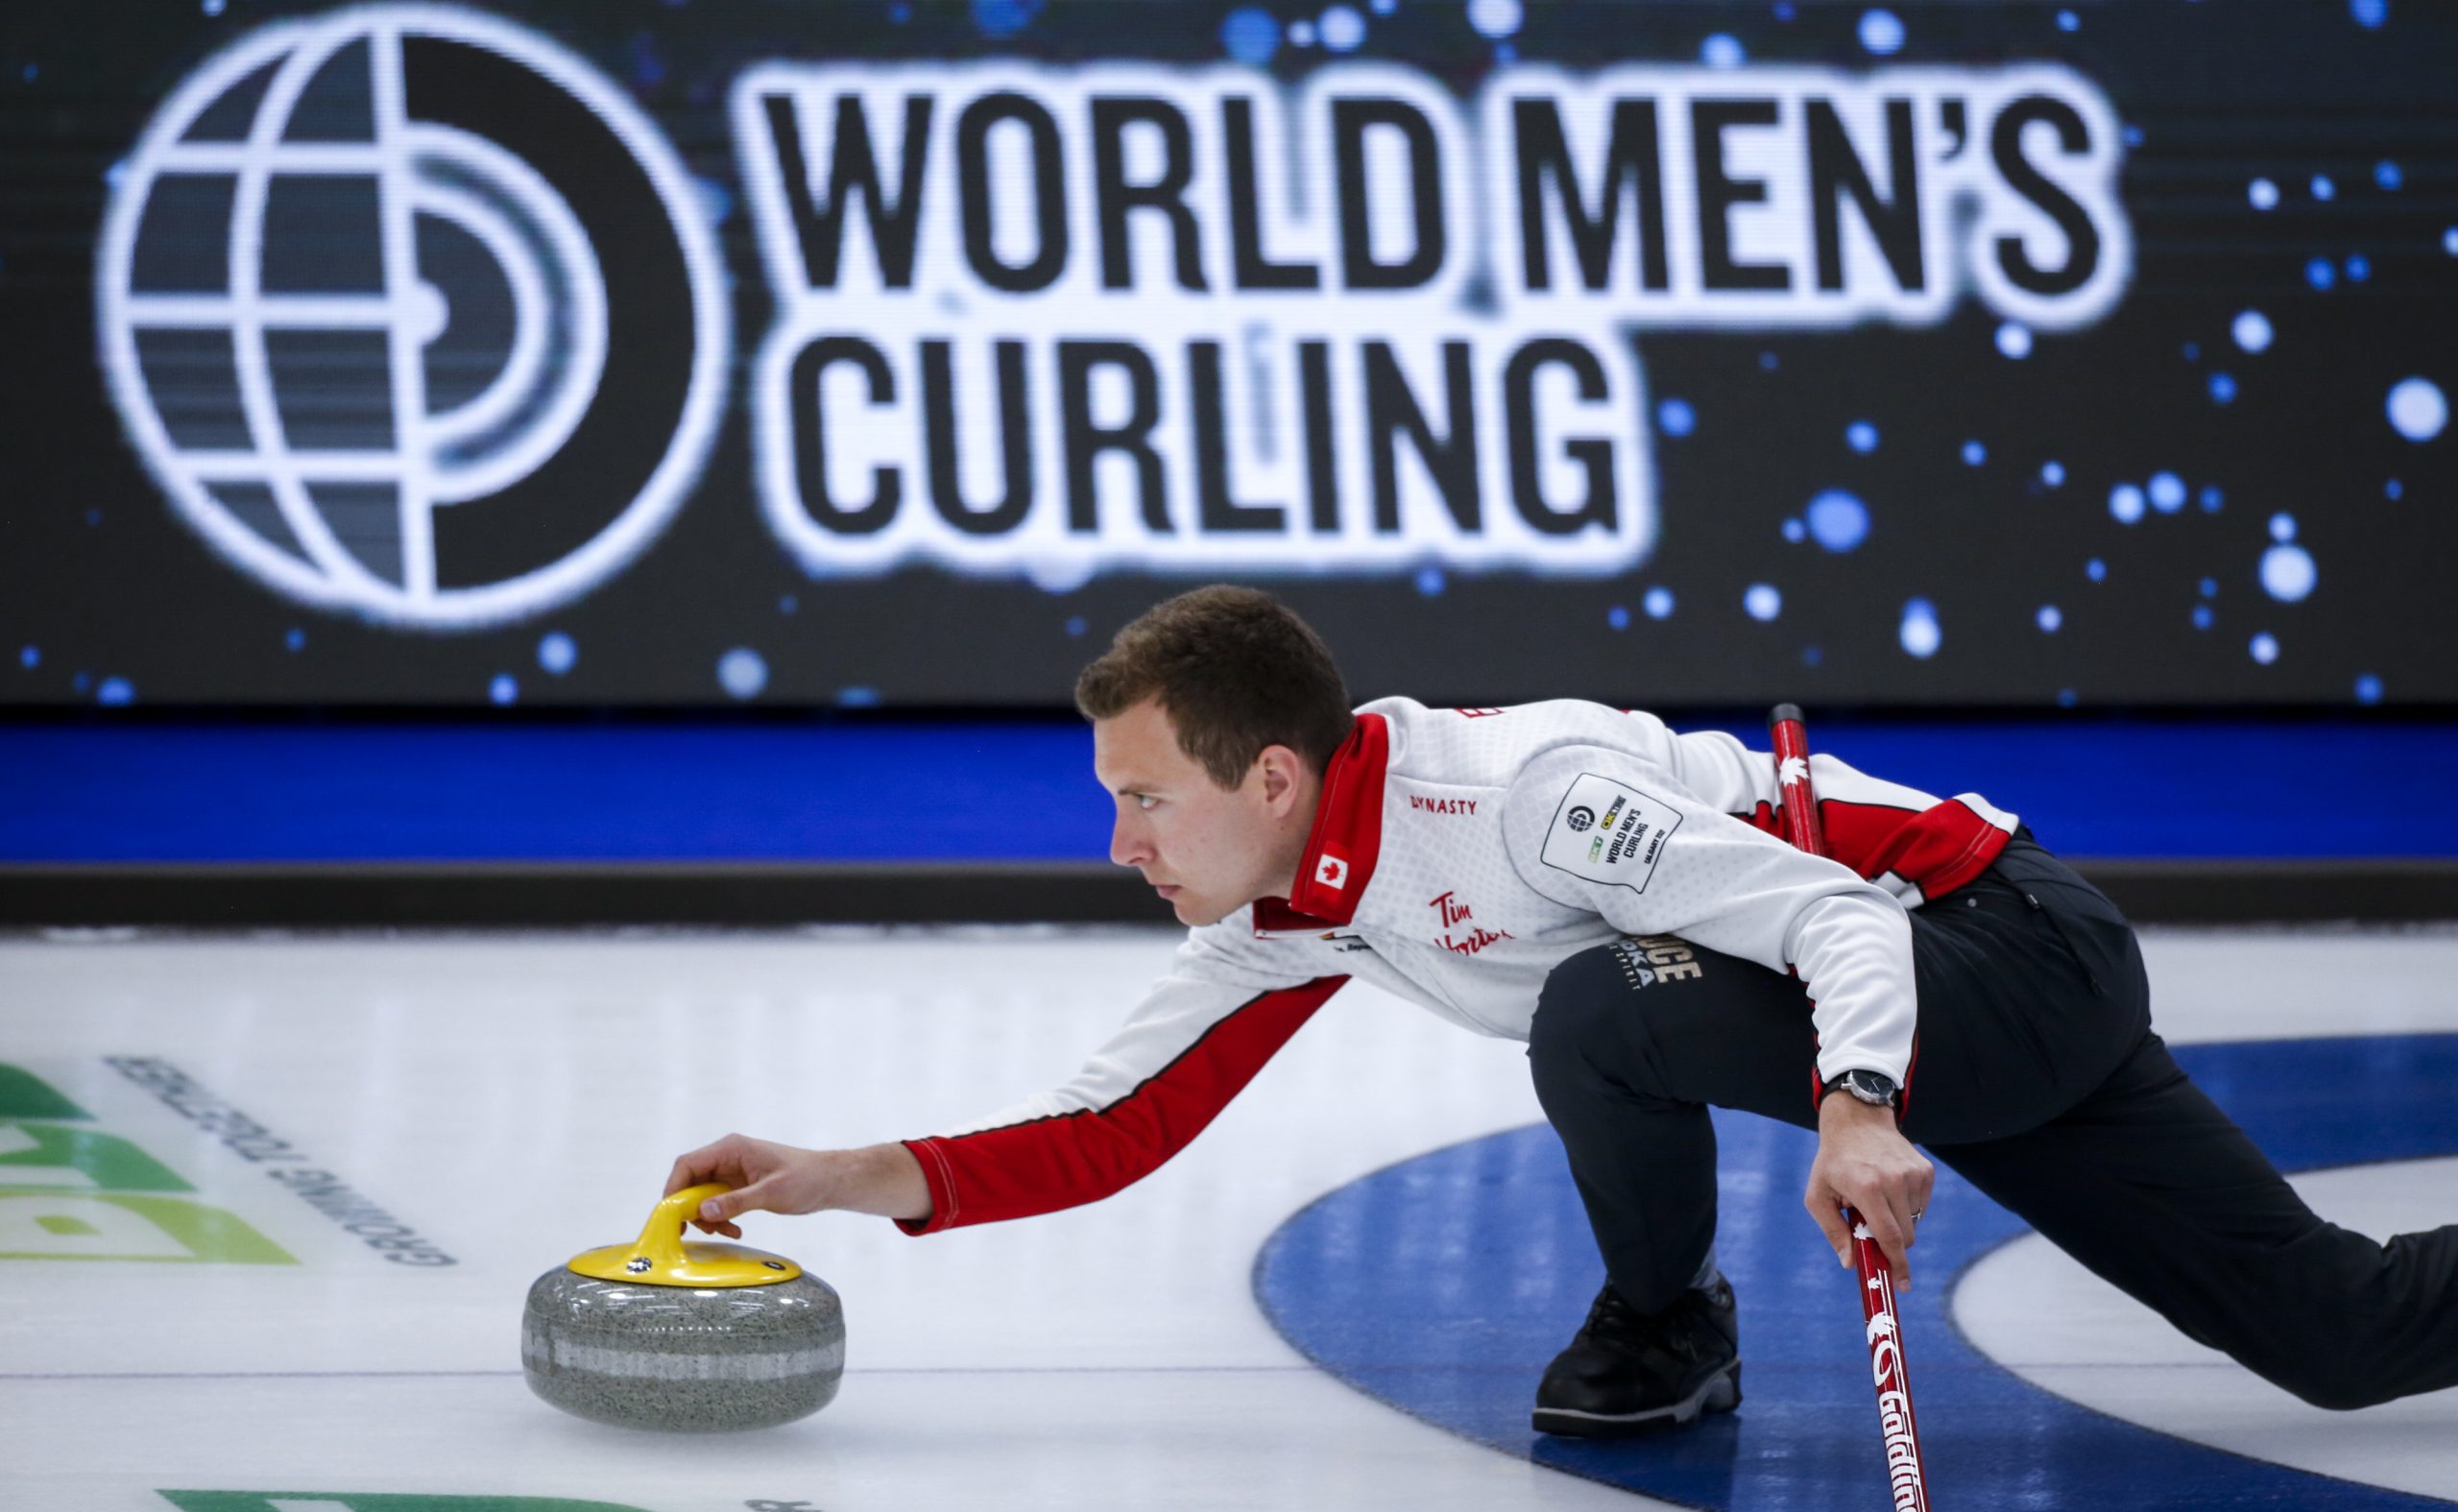 World men's curling championship playoffs on hold due to COVID19